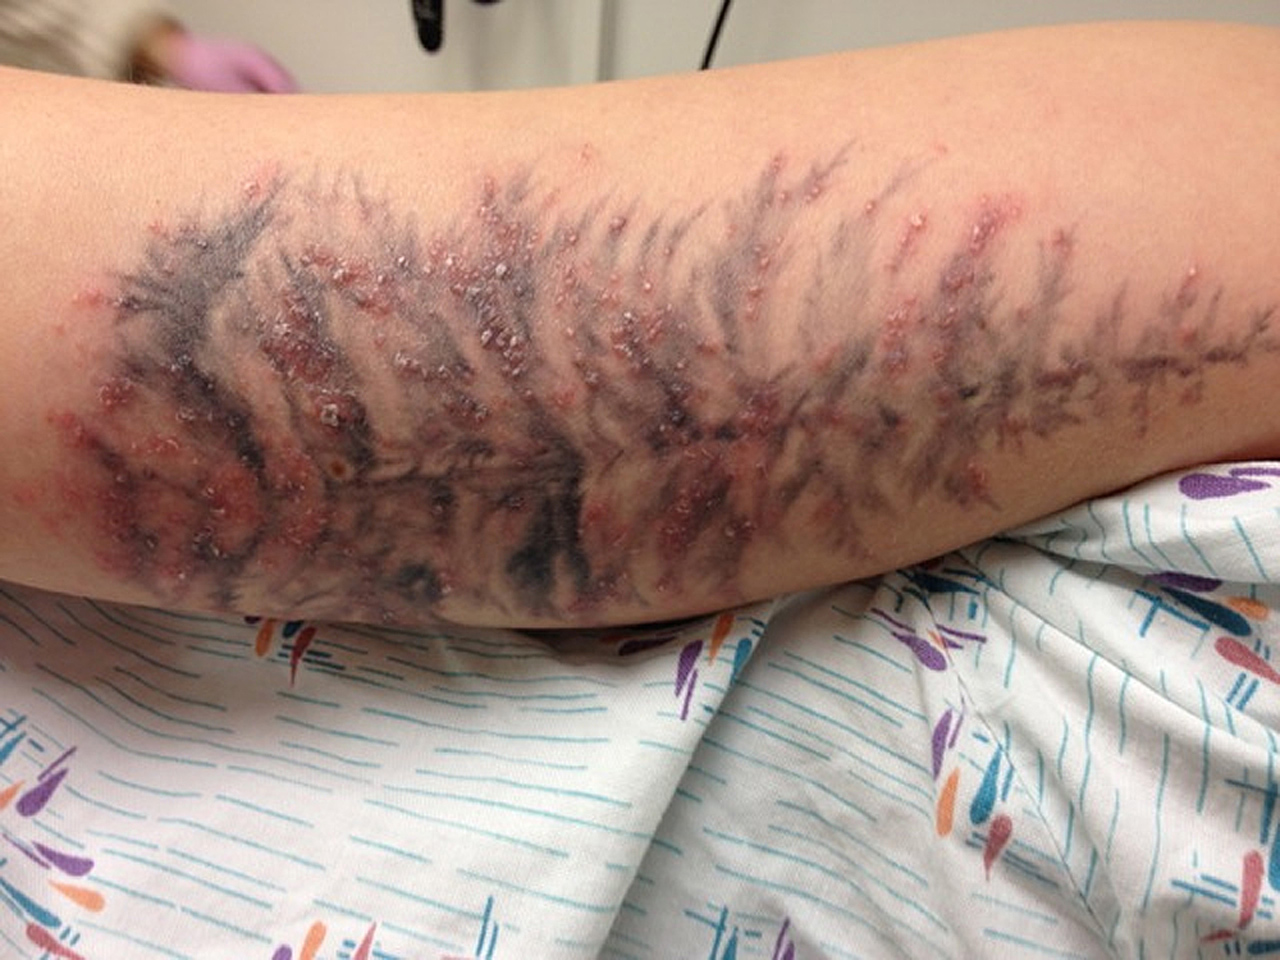 Tattoo staph infection pictures